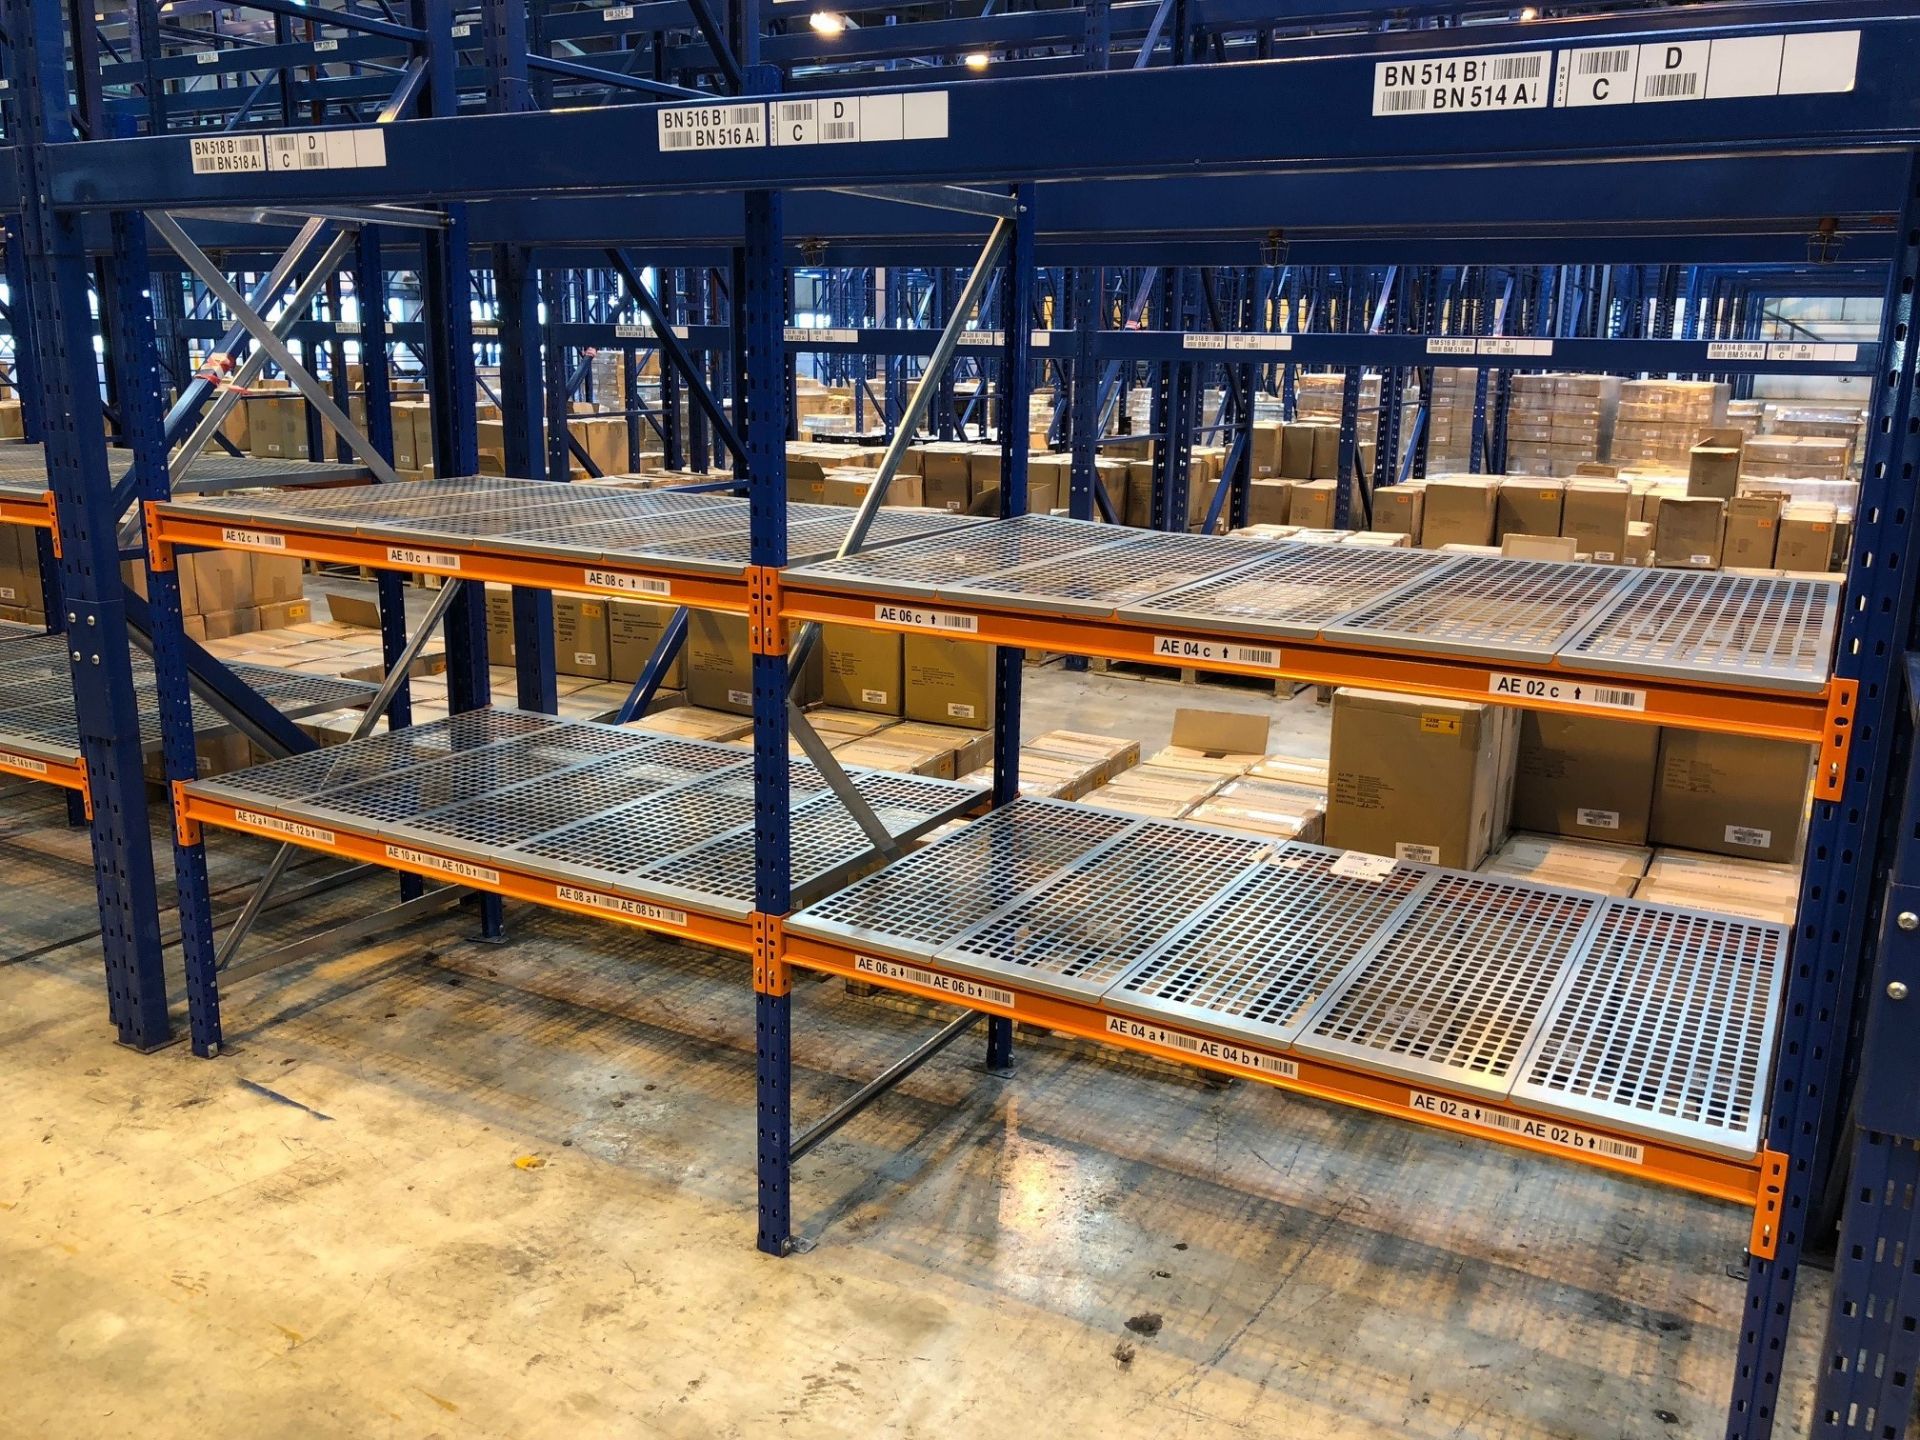 2 x Bays of Small Warehouse Racking/Shelving - Excellent Condition (L1500xH2000xD900mm - 3 x